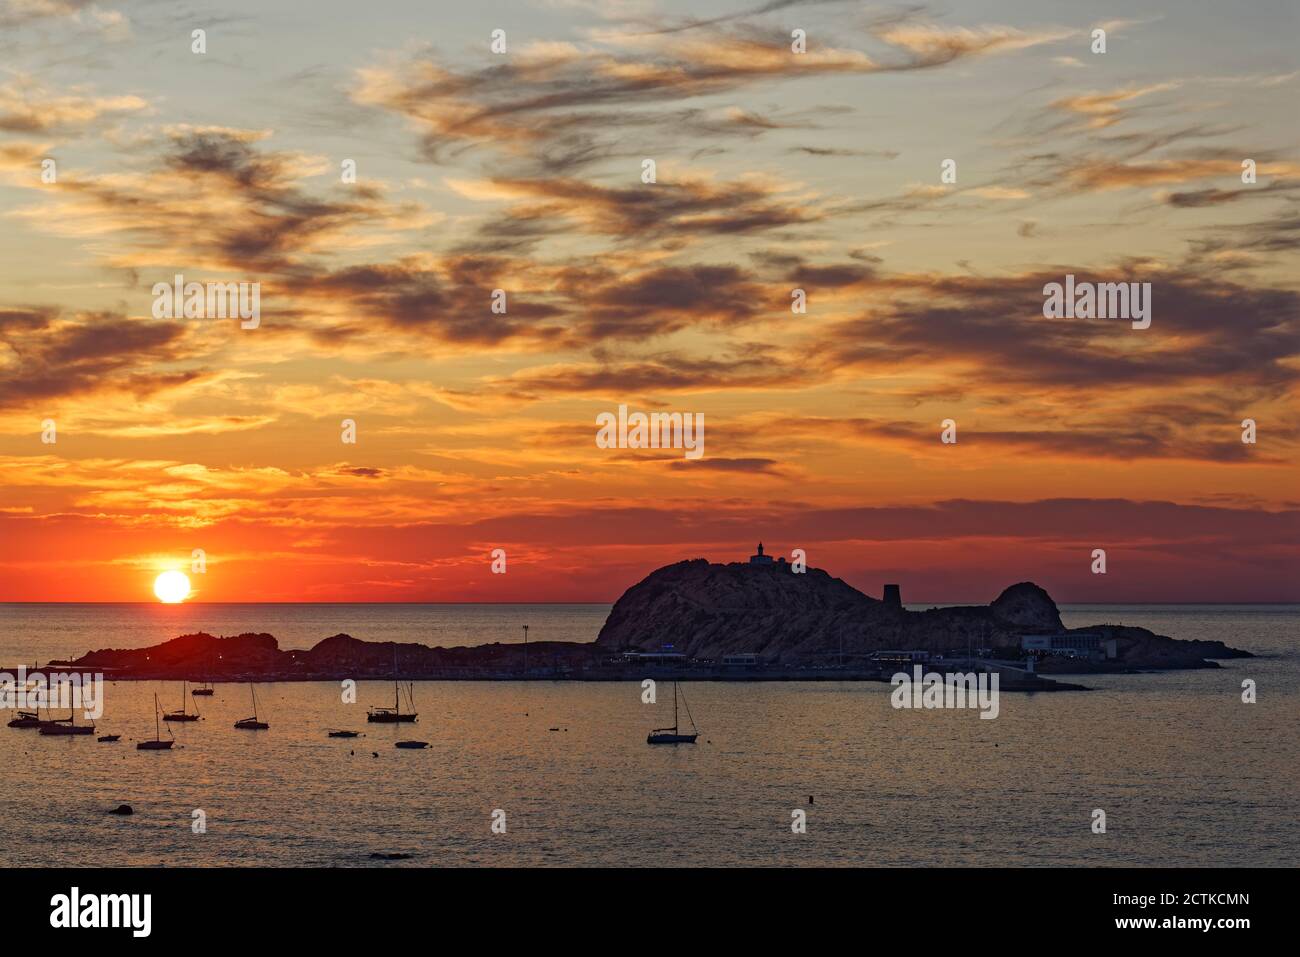 France, Haute-Corse, LIle-Rousse, Silhouettes of sailboats in front of small Mediterranean island at moody sunset Stock Photo